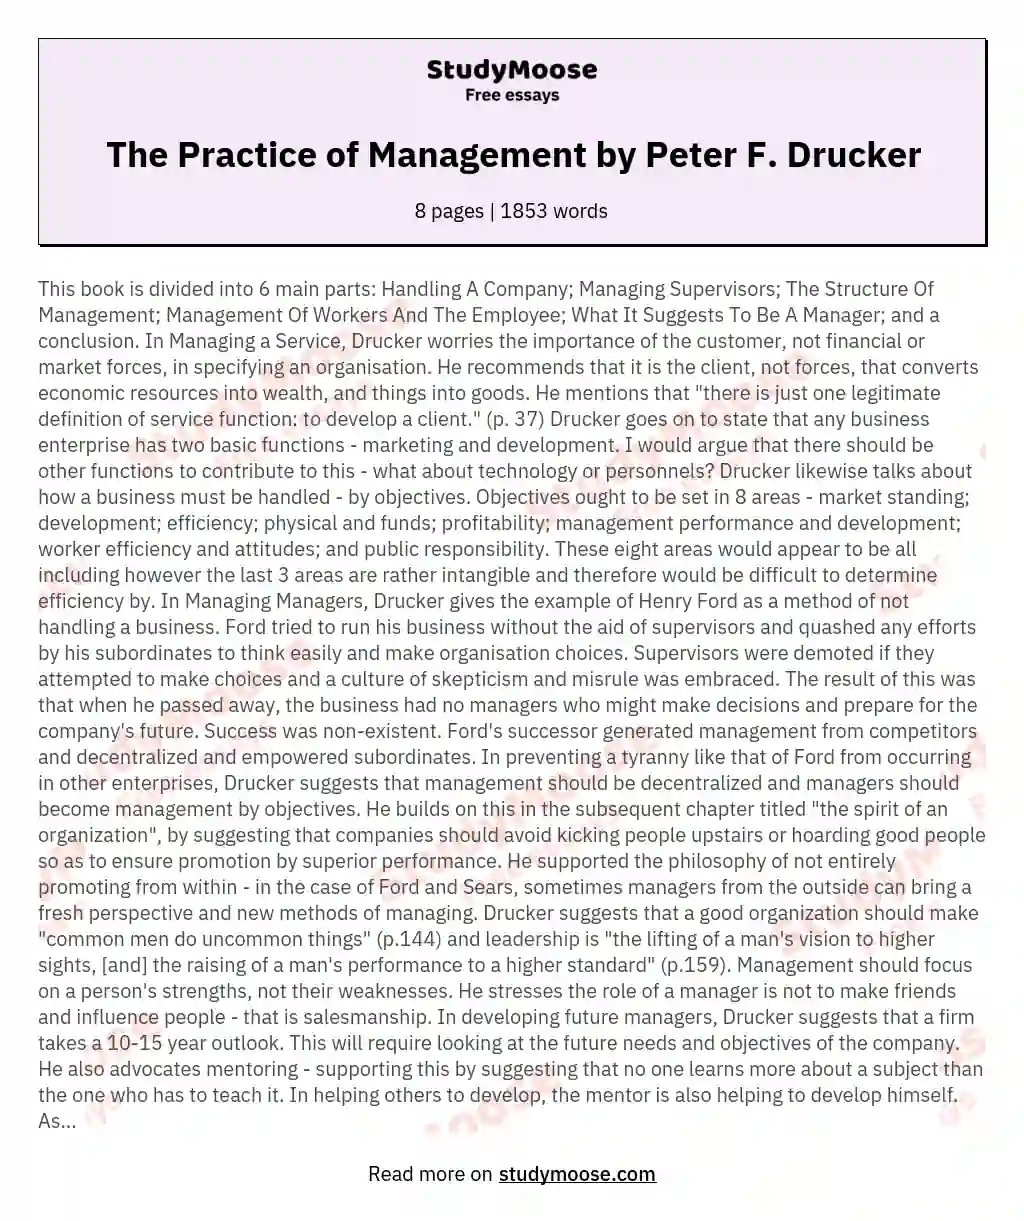 The Practice of Management by Peter F. Drucker essay